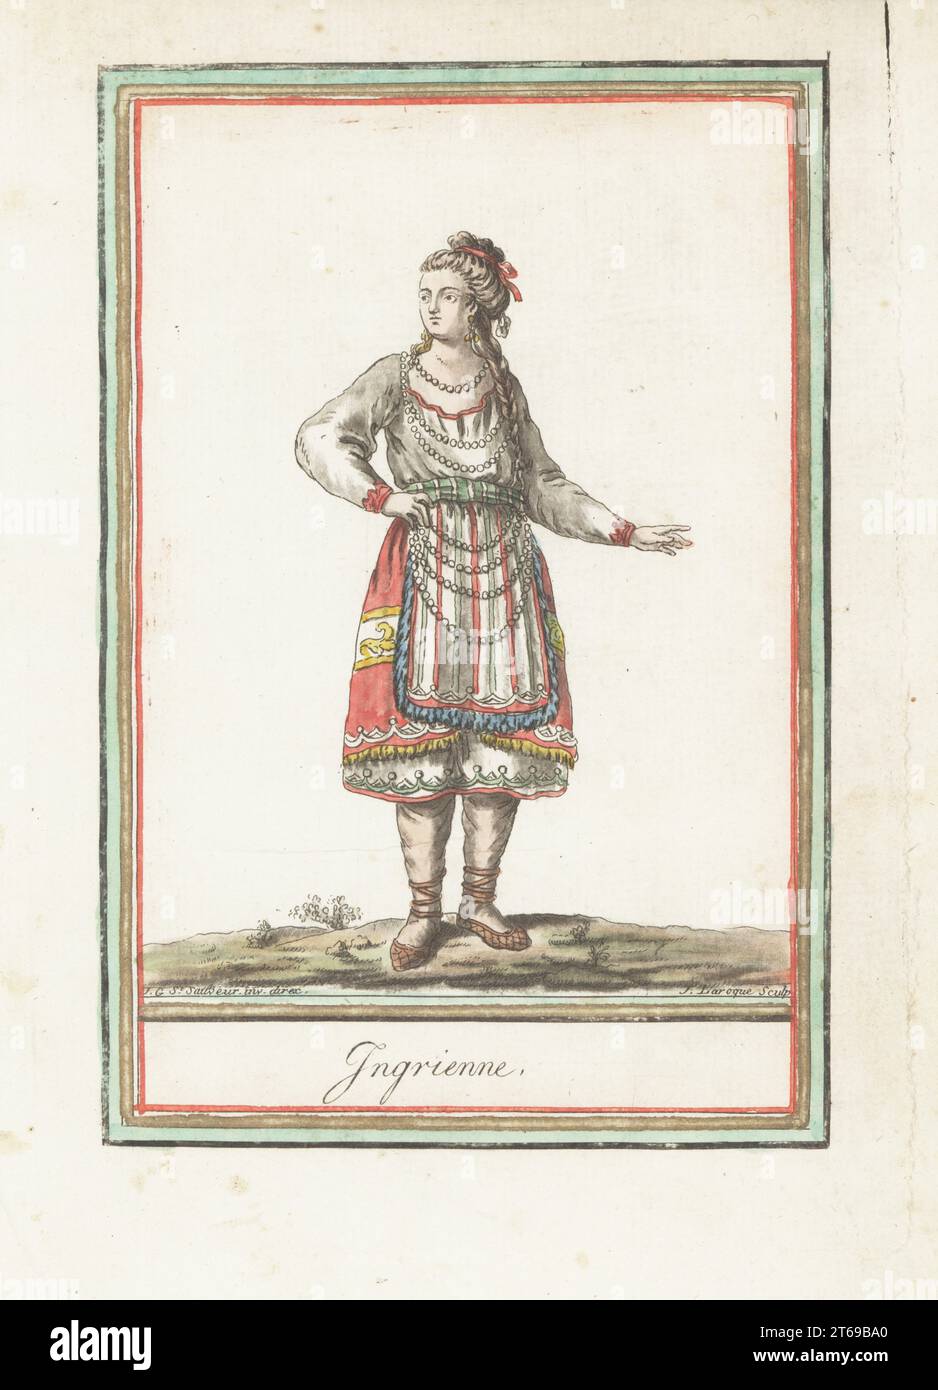 Ingrian woman of Saint Petersburg, Russia. Hair in plaits tied with ribbons, linen dress with embroidered collar and cuffs, bead necklaces, sash belt, embroidered skirt, apron decorated with pearls and glass beads, leather shoes. Ingrienne. Handcoloured copperplate engraving by J. Laroque after a design by Jacques Grasset de Saint-Sauveur from his Encyclopedie des voyages, Encyclopedia of Voyages, Bordeaux, France, 1792. Stock Photo